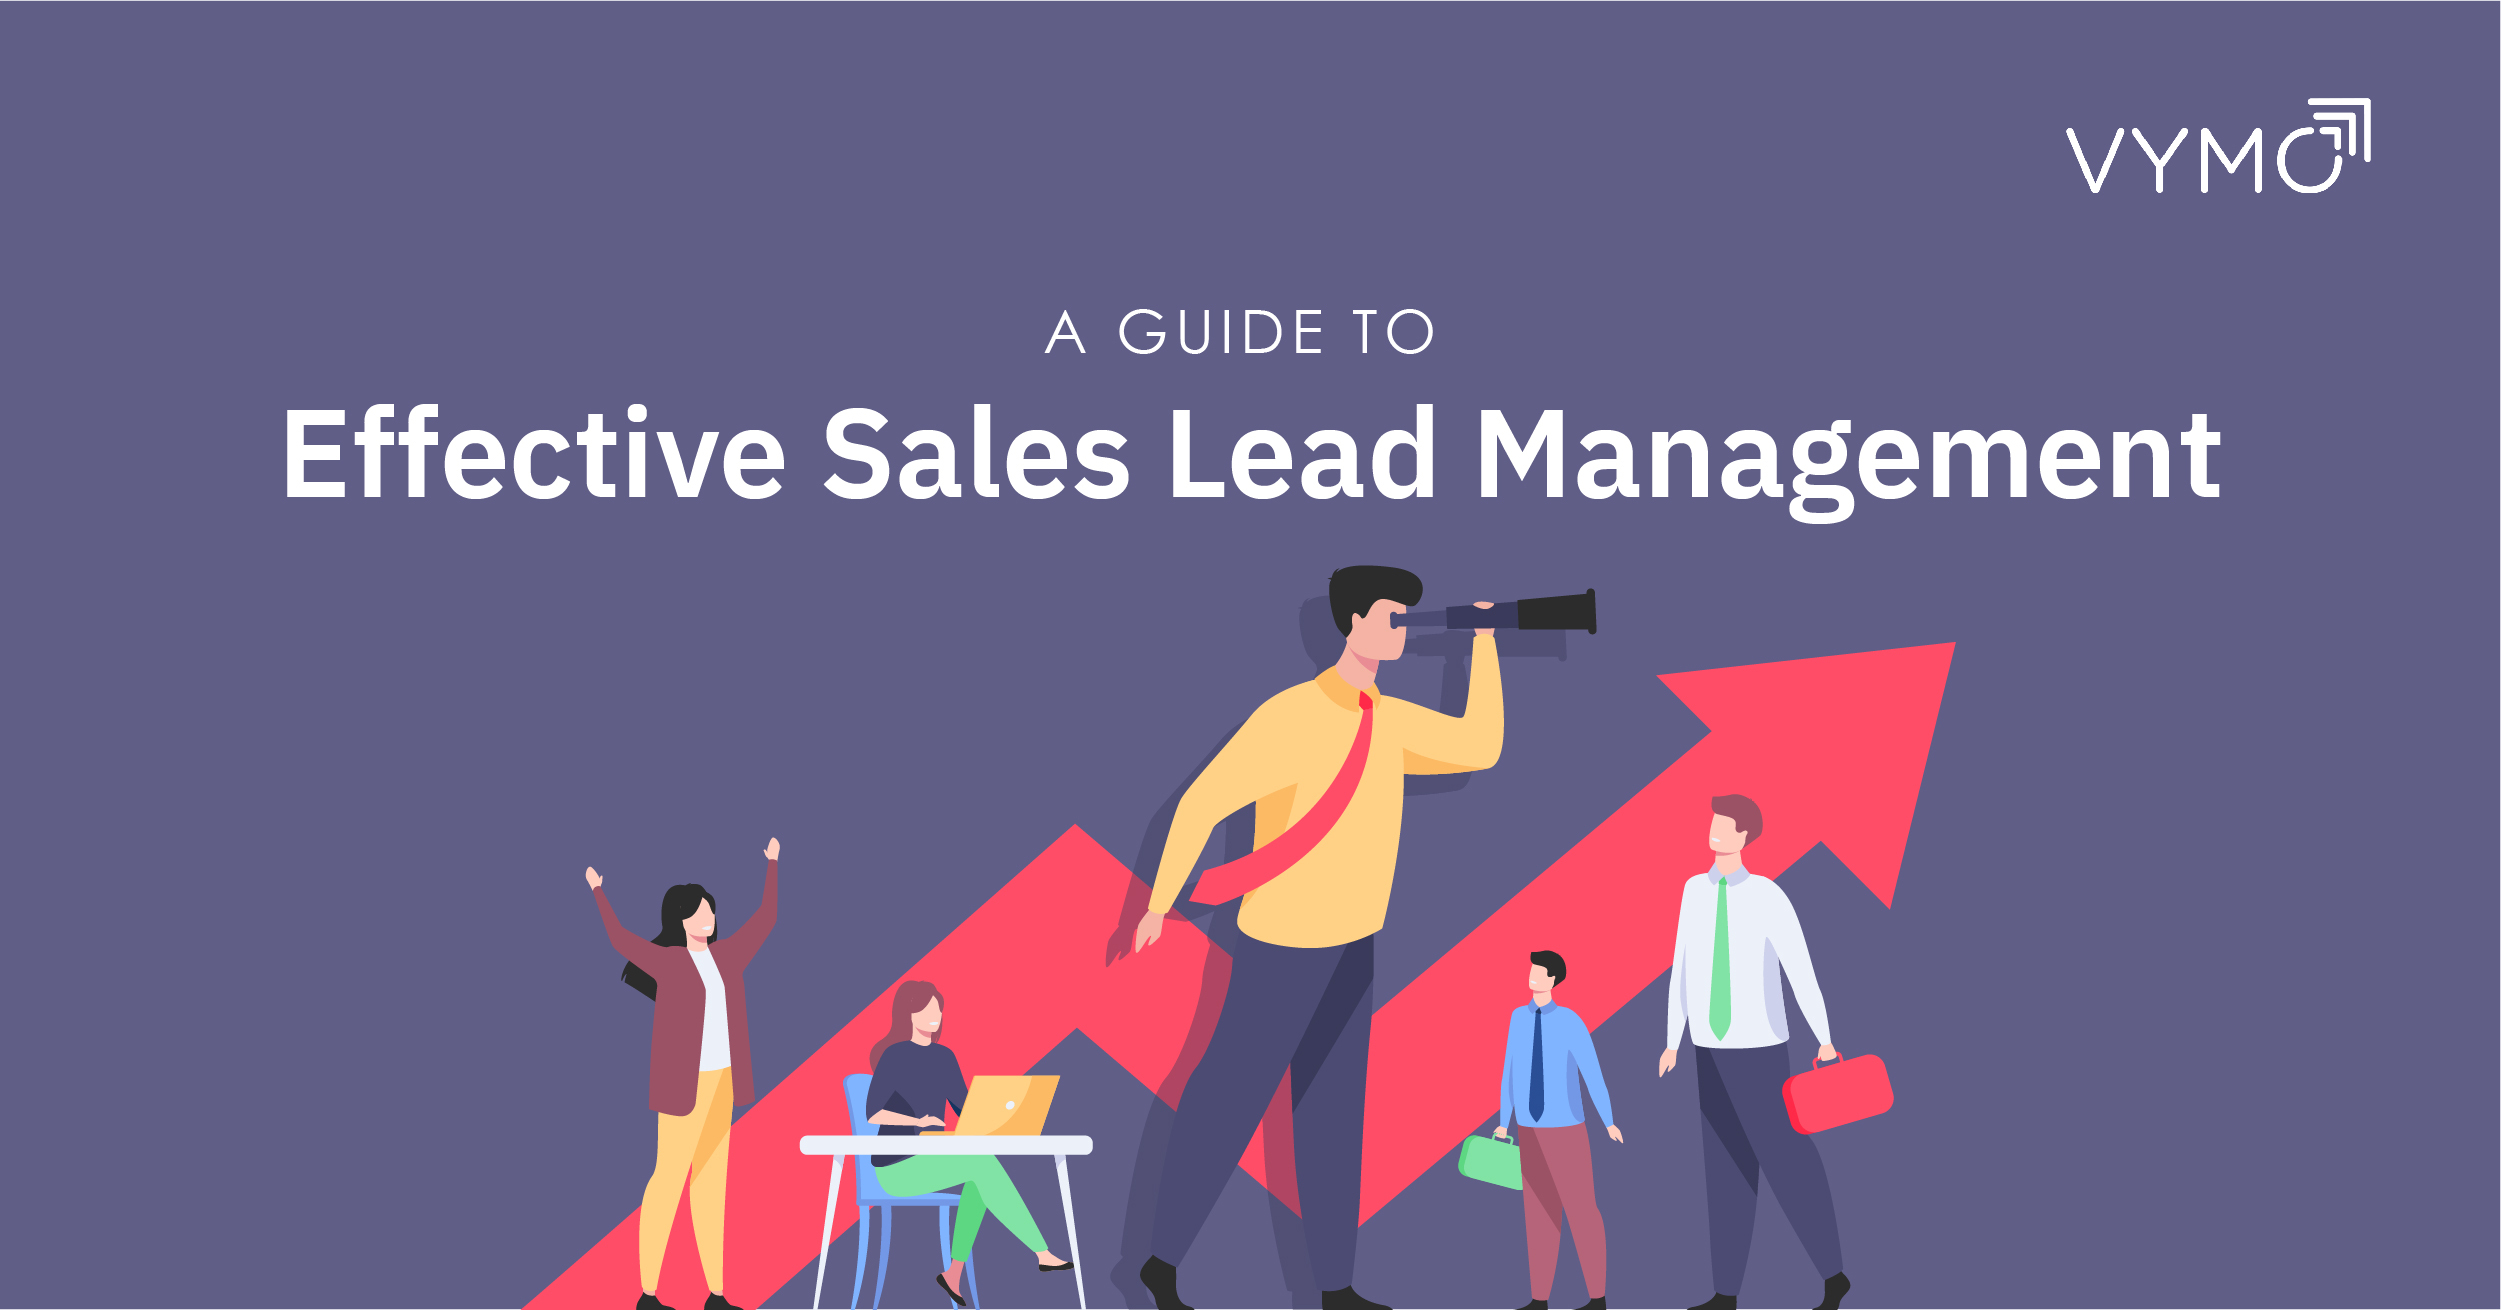 A guide to effective sales lead management